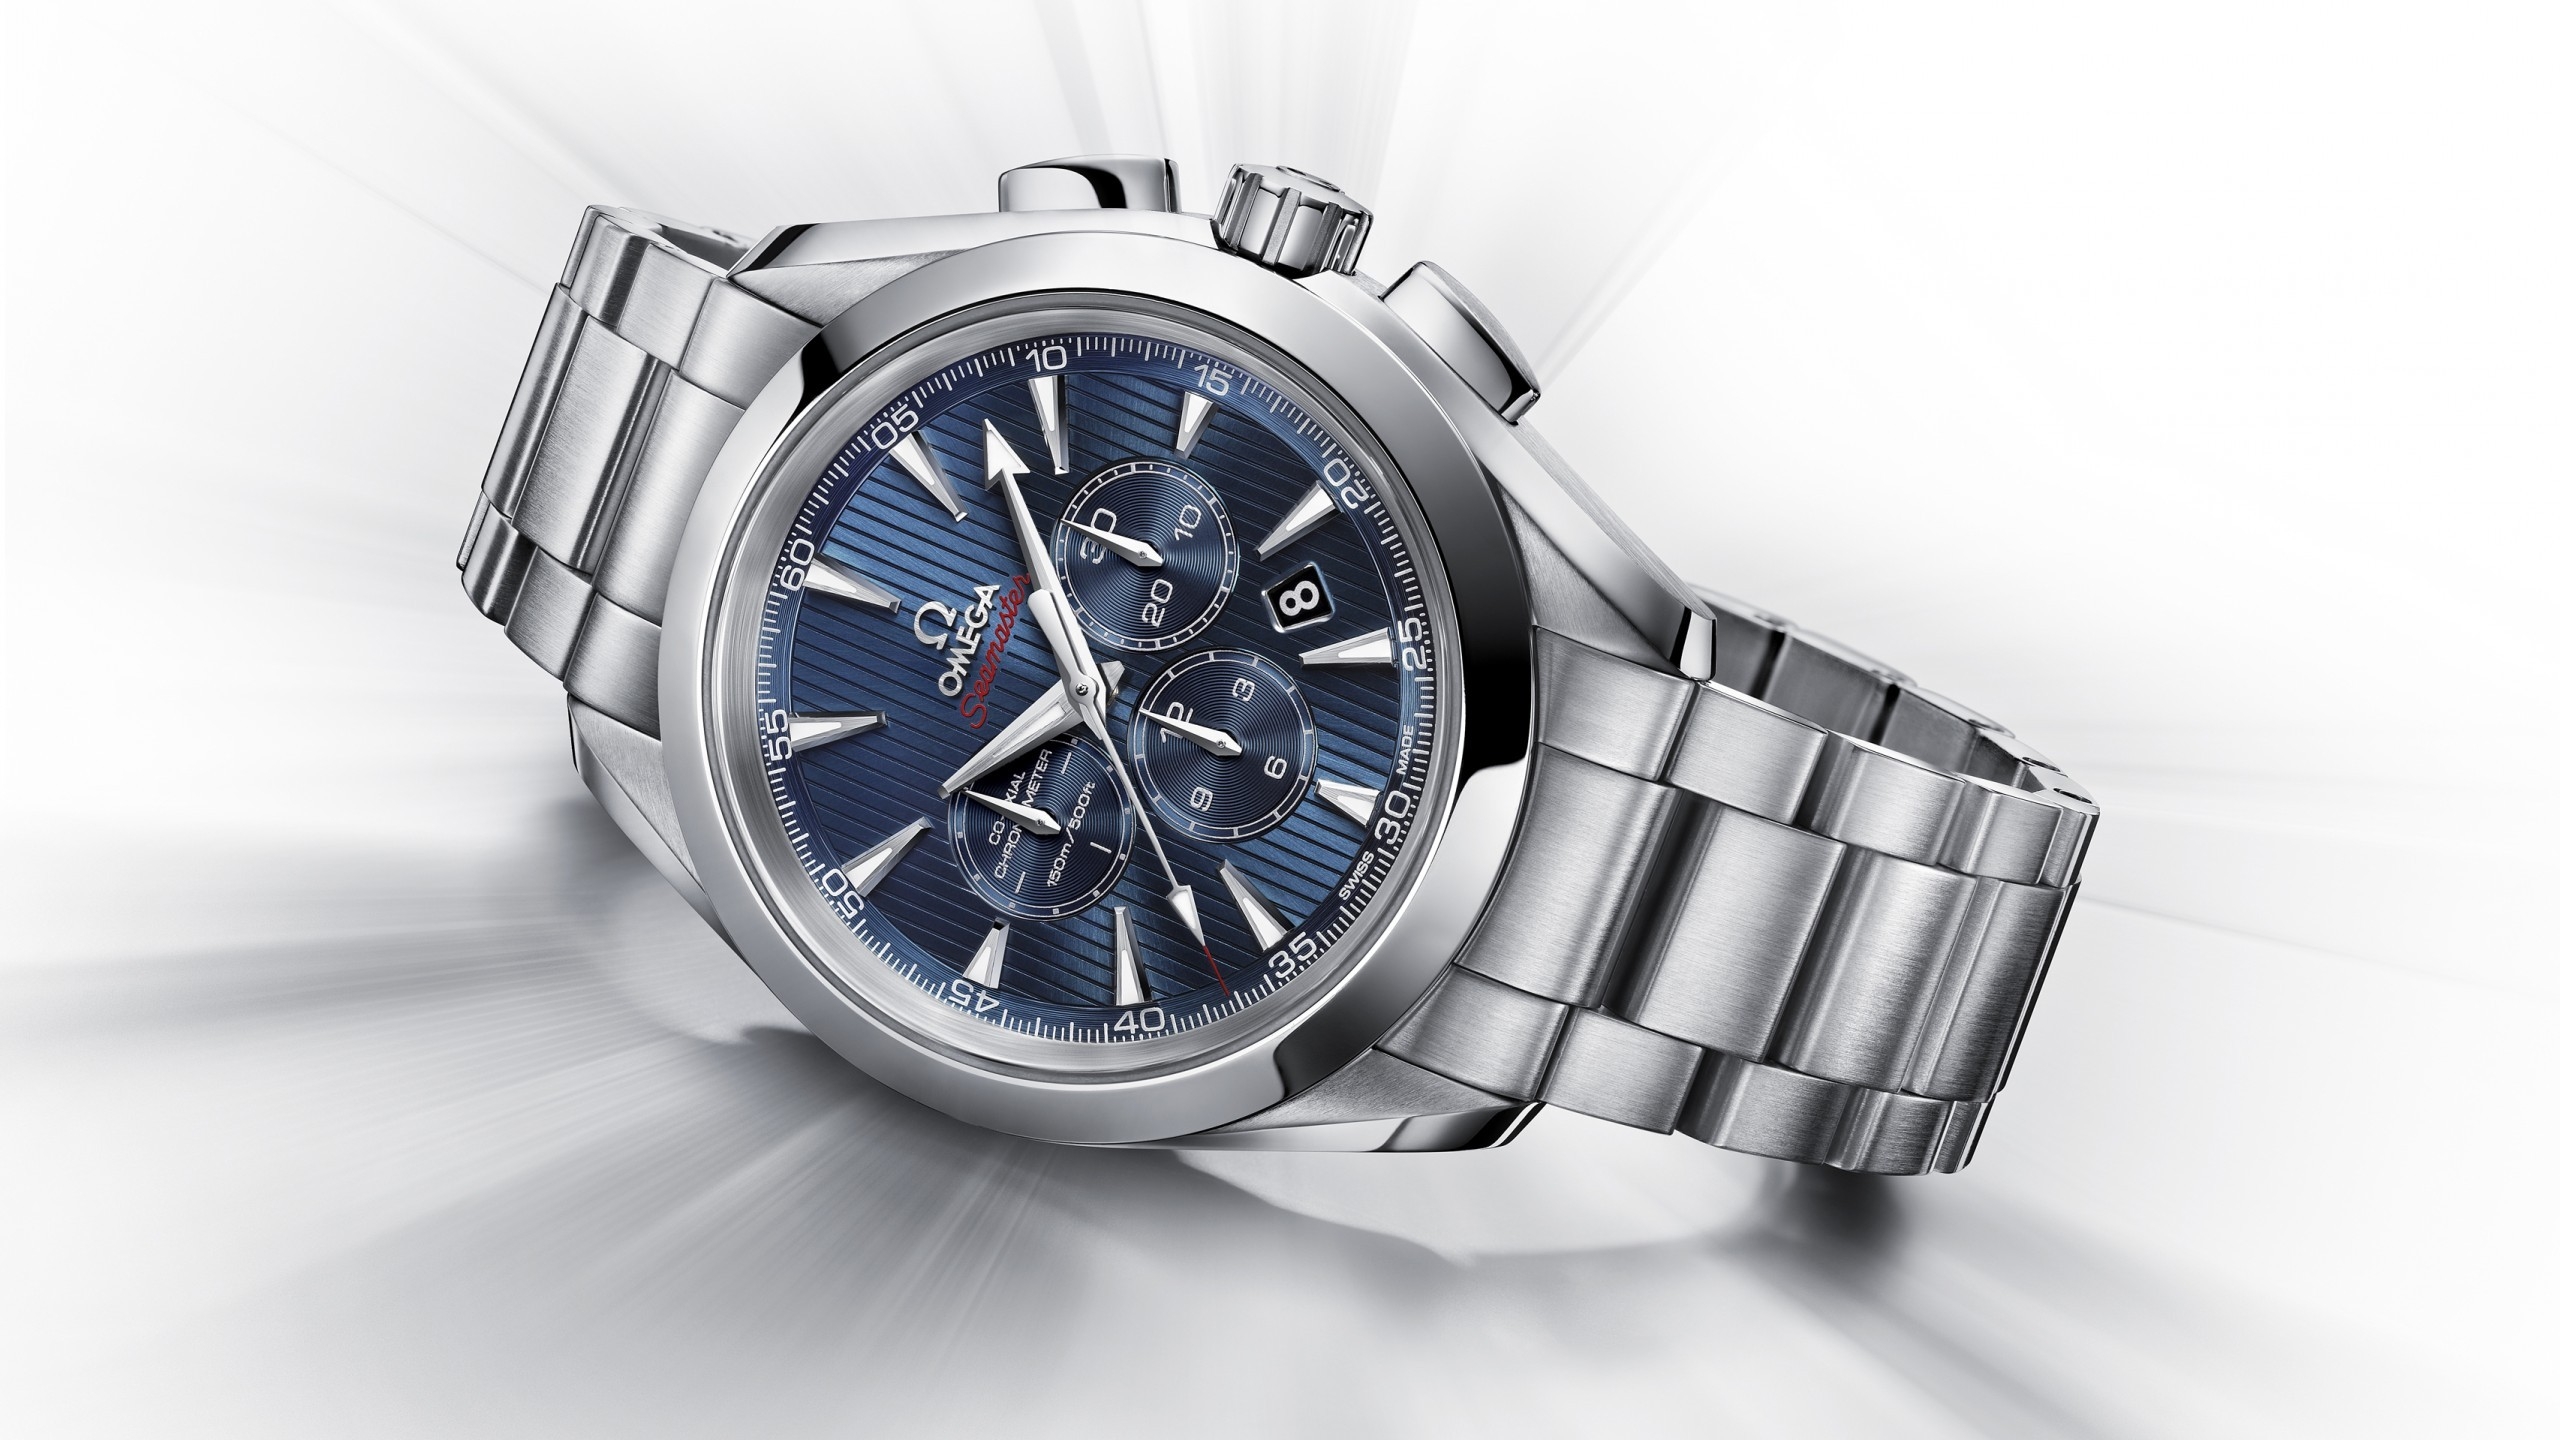 New Omega Seamaster Watch for 2560x1440 HDTV resolution